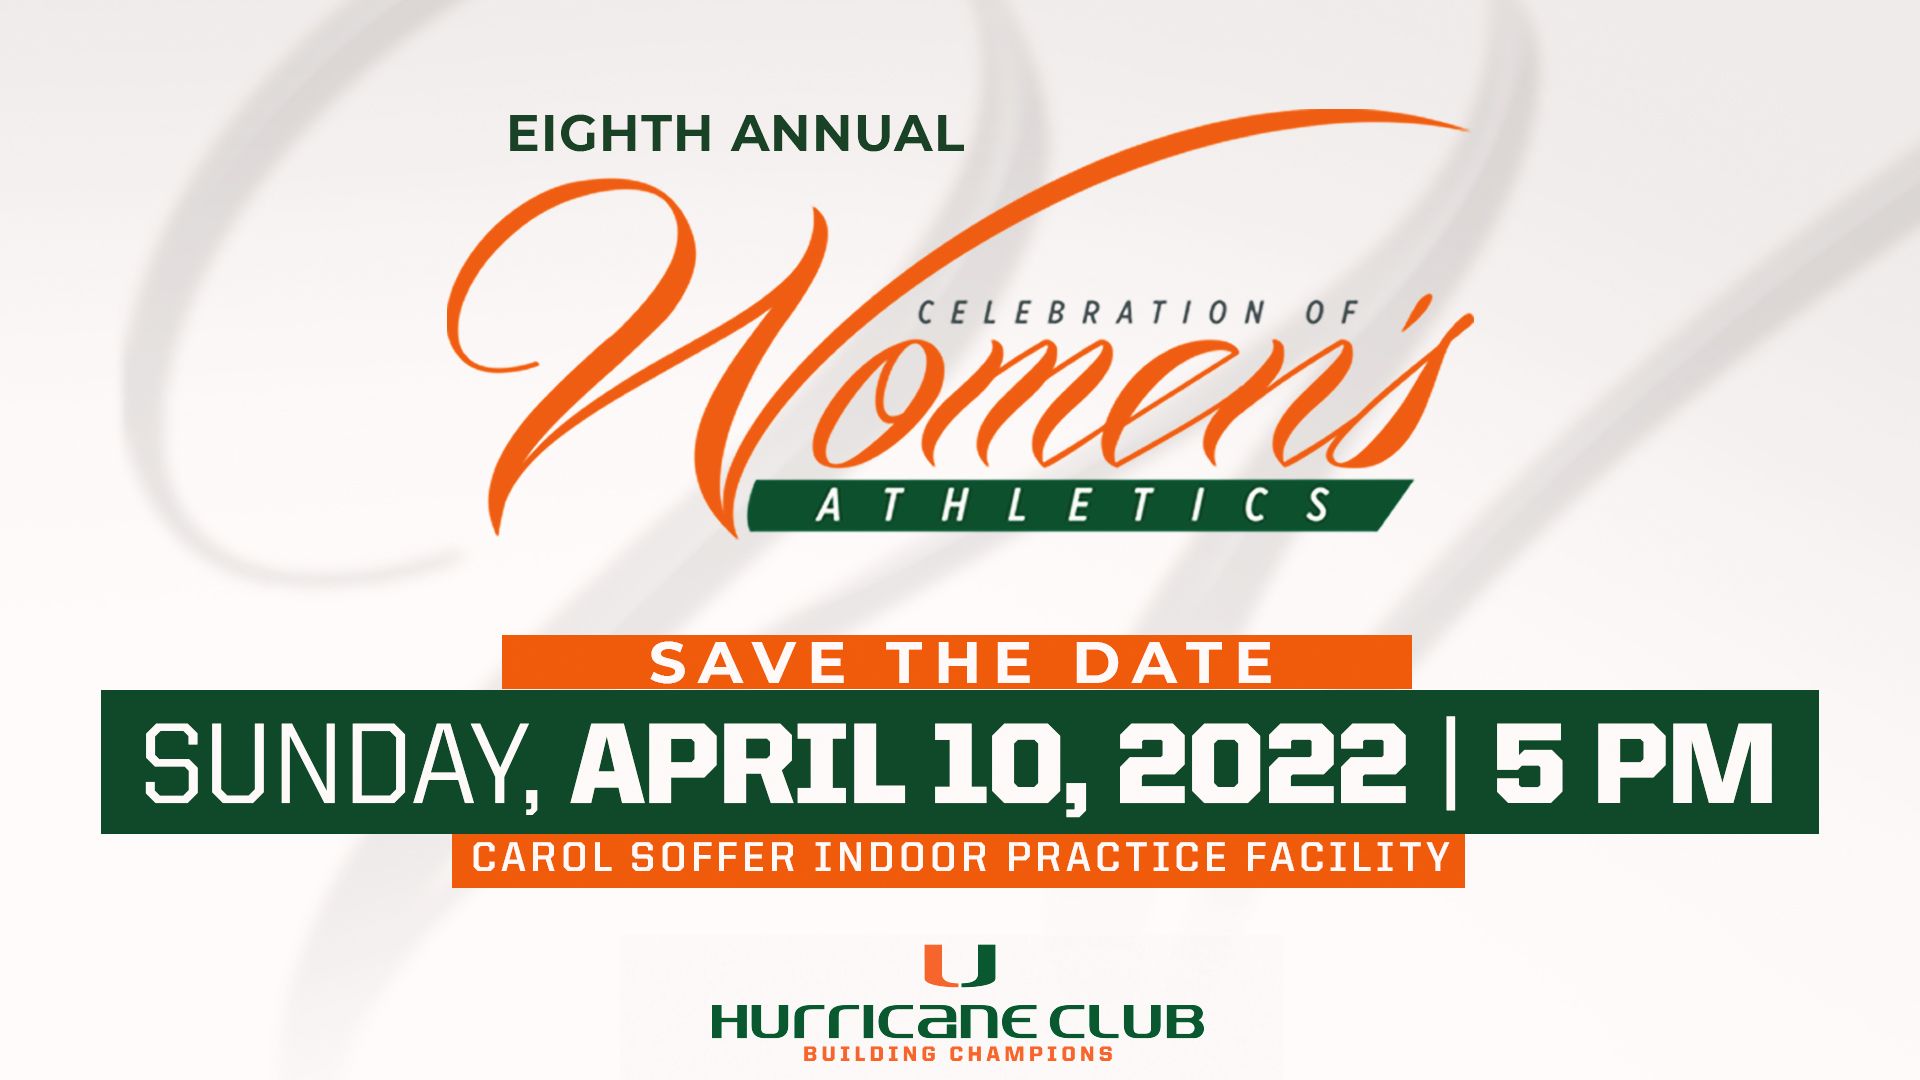 Save the Date for the Celebration of Women's Athletics